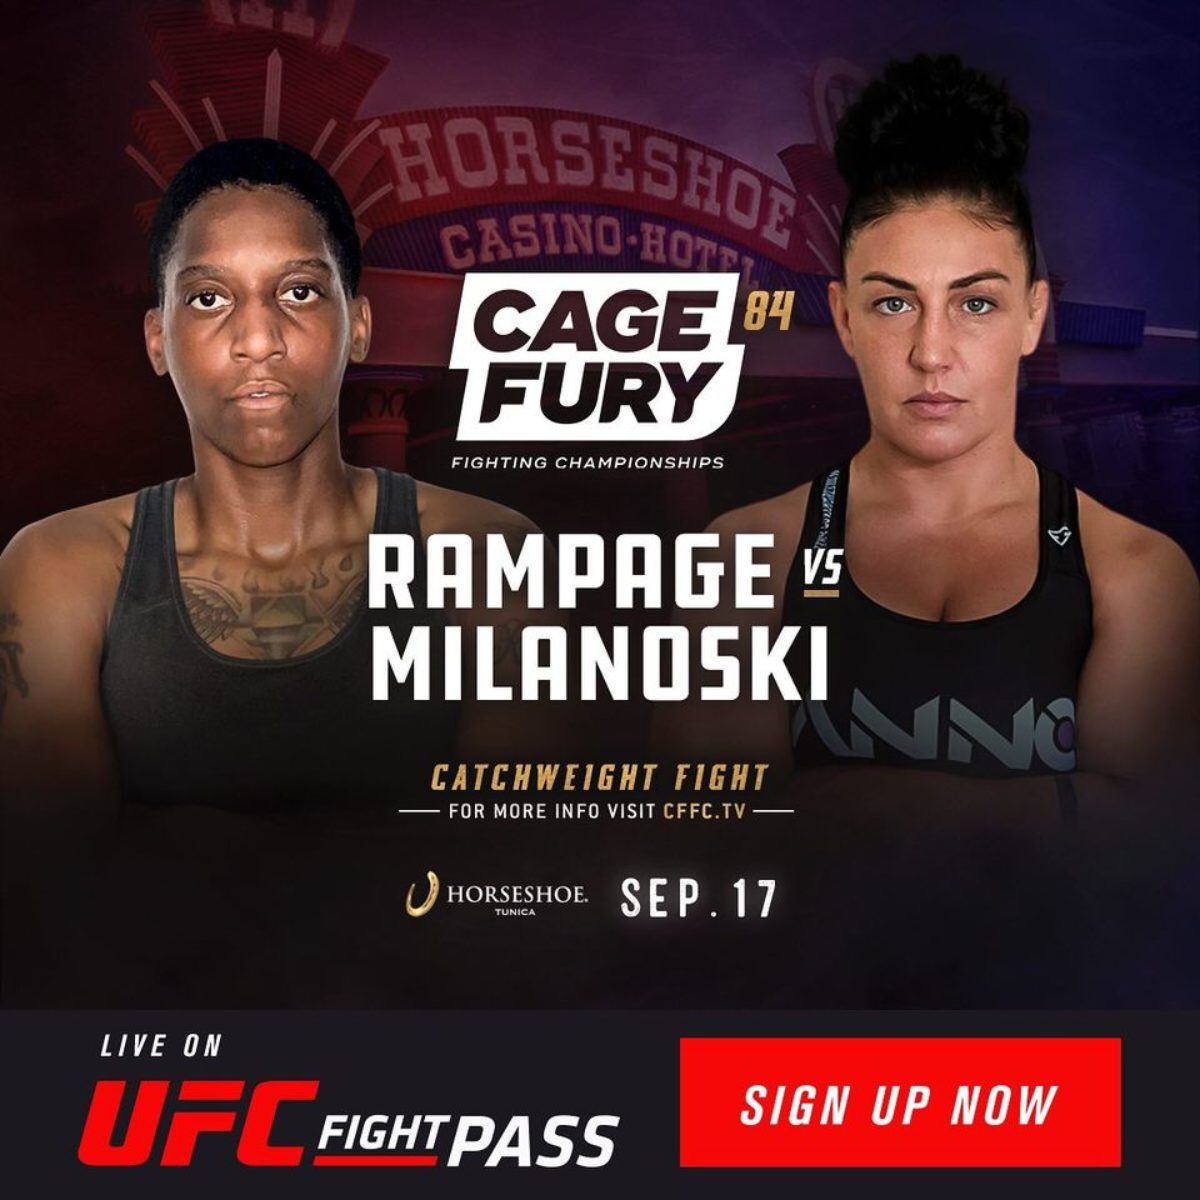 Live Cage Fury FC 91 Online | Cage Fury FC 91 Stream Link 2